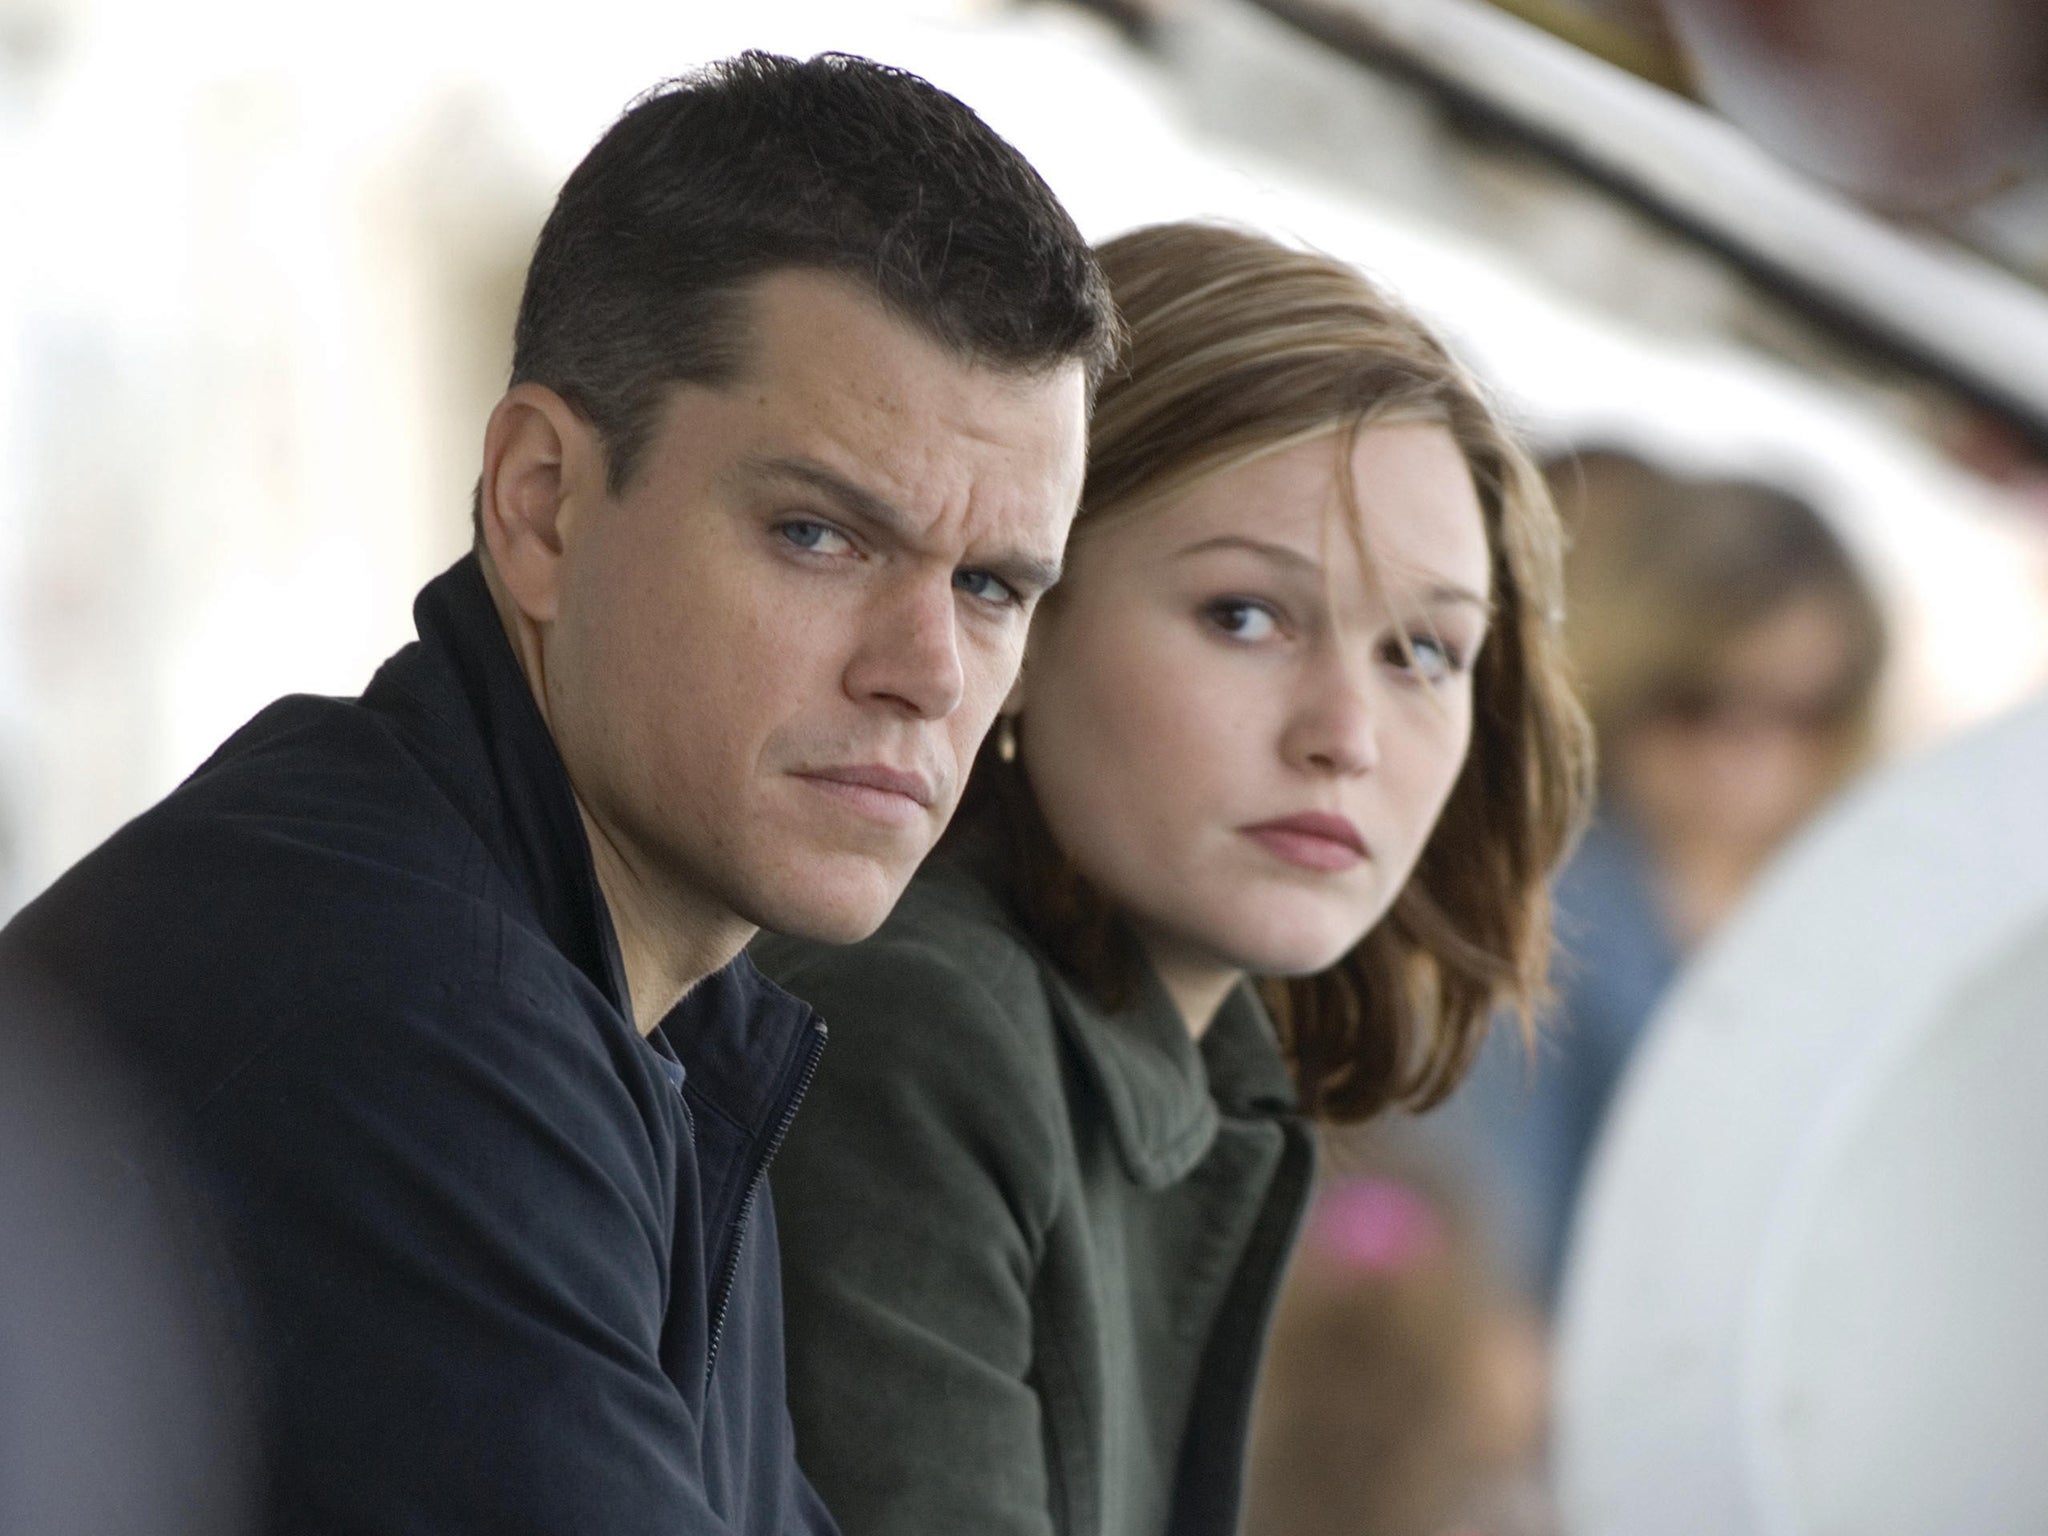 The Bourne franchise is being removed from Netflix